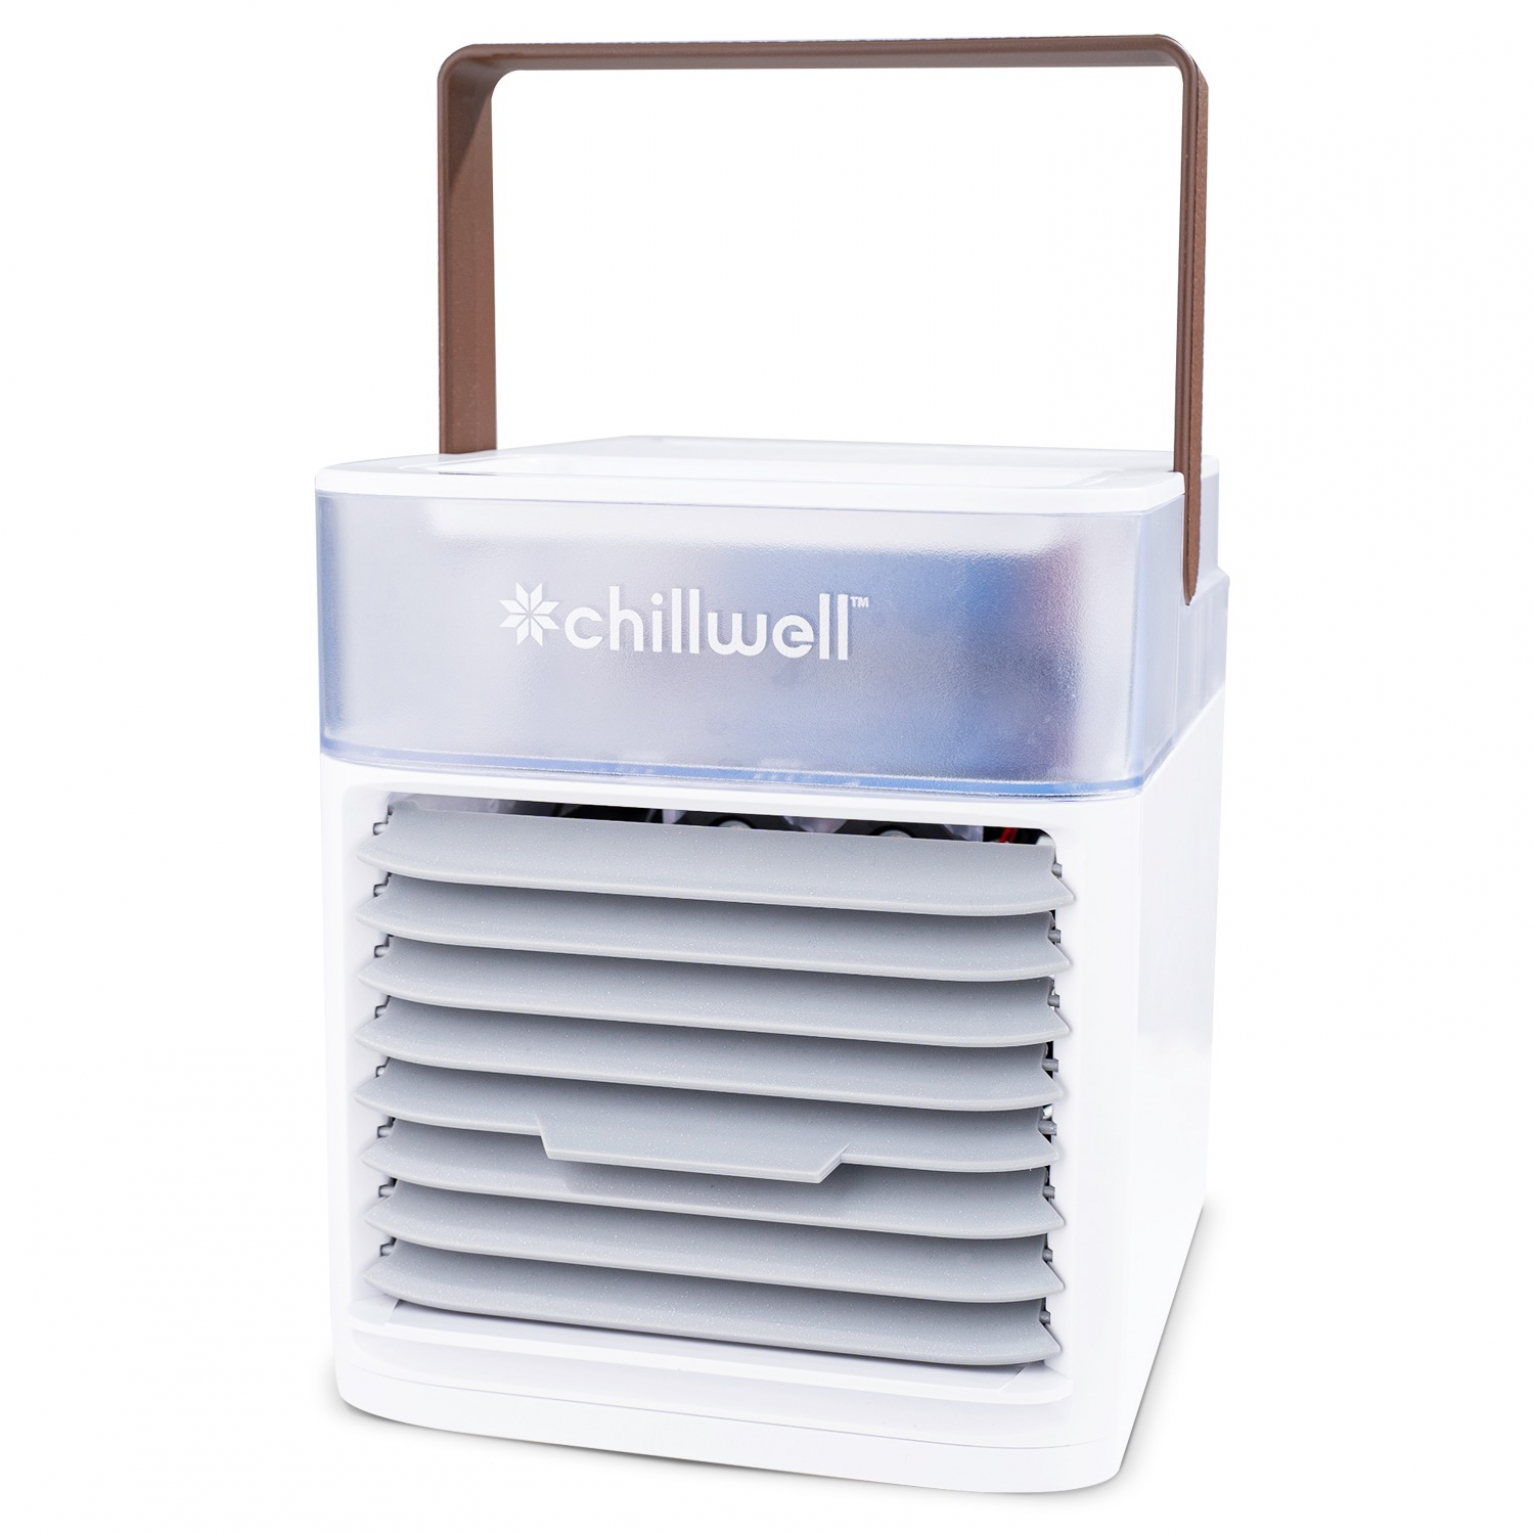 Chillwell AC Cooler Good Or Bad